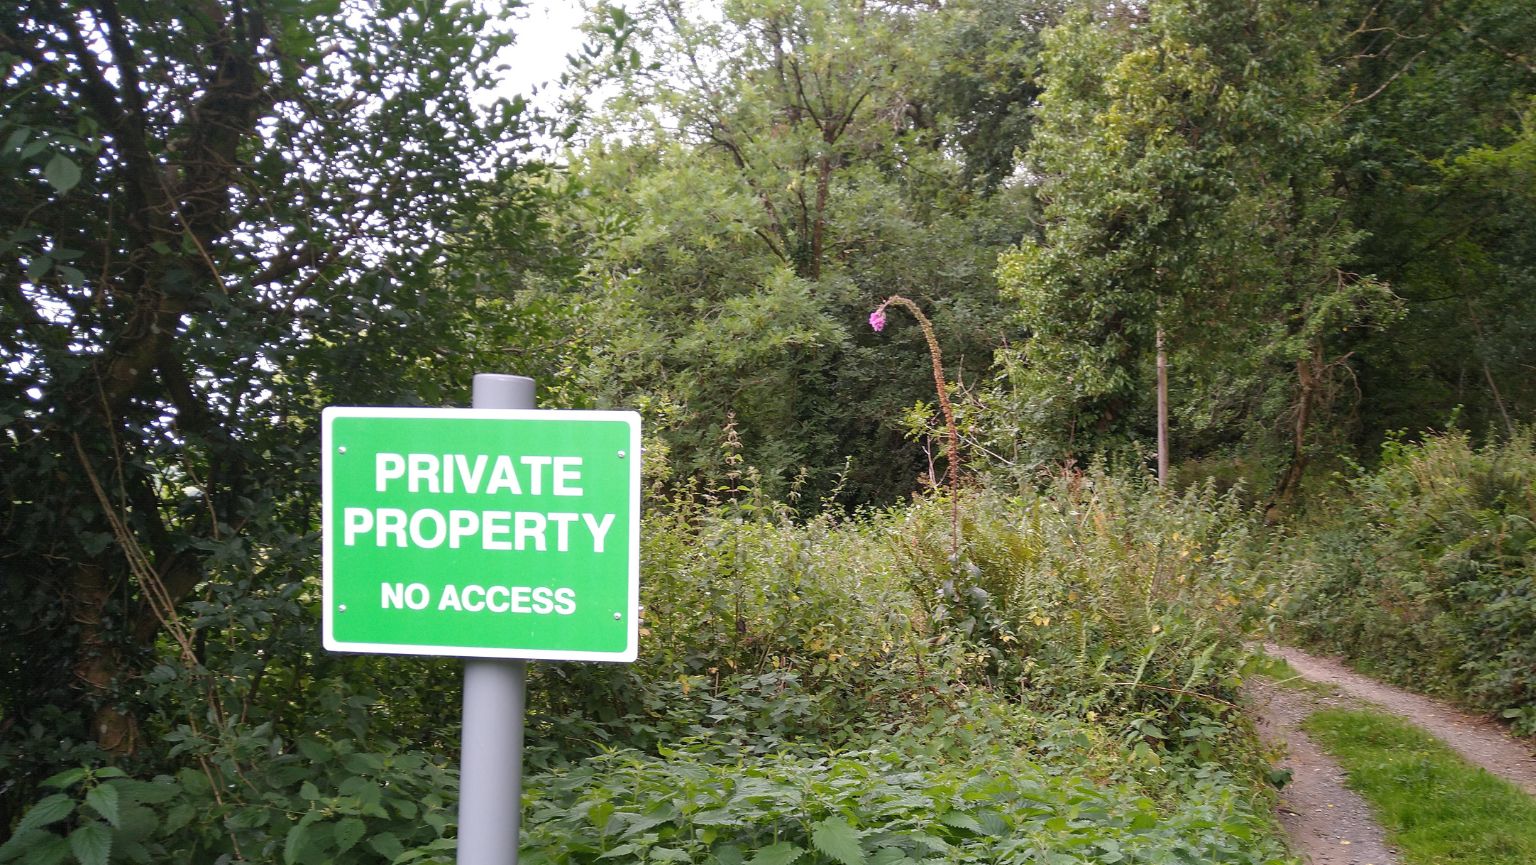 https://commons.wikimedia.org/wiki/File:Dartmoor_private_property_sign_2020.jpg